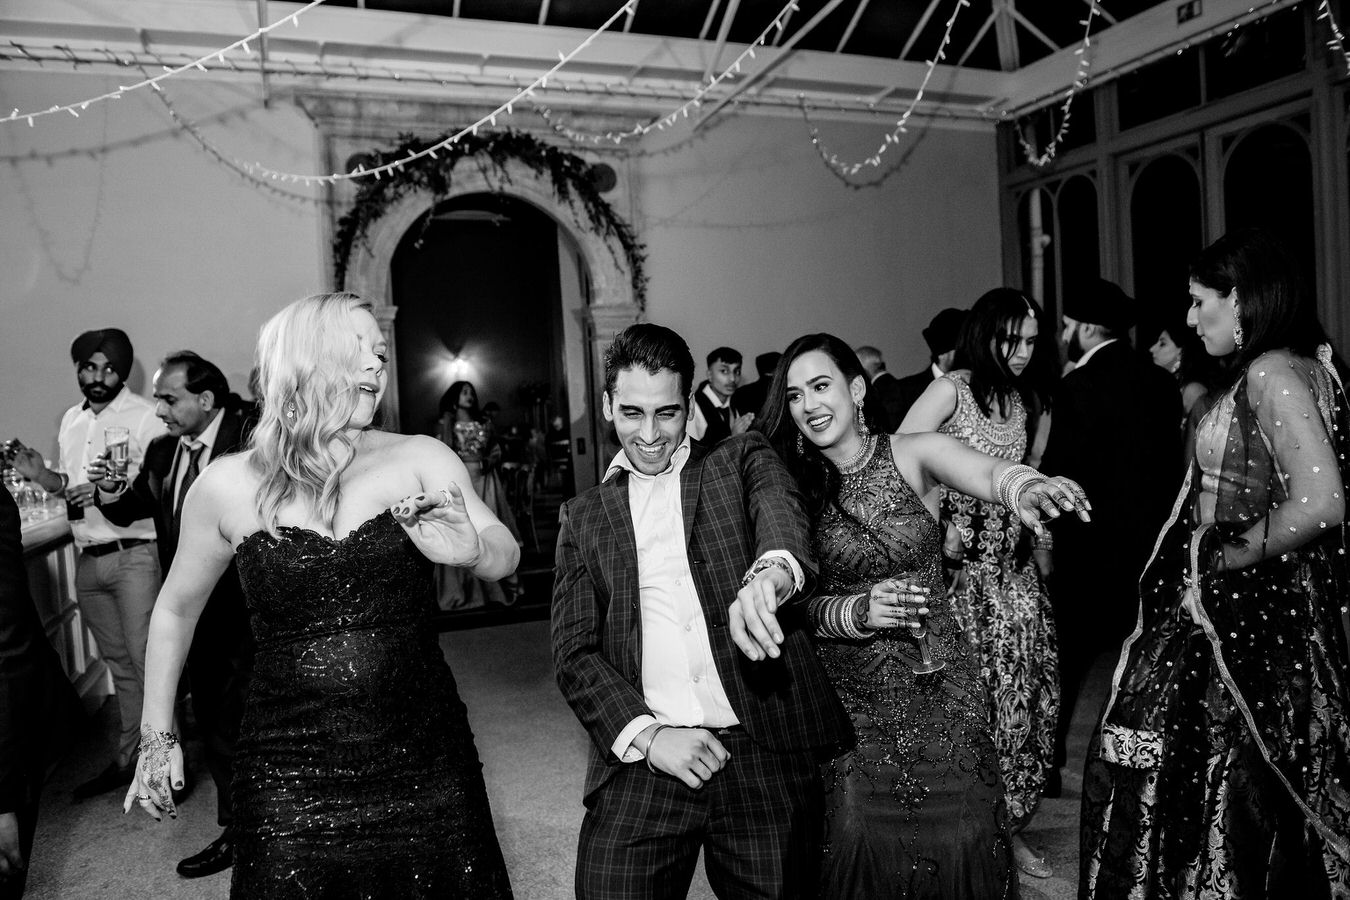 Bride with a glass of champagne in hand is dancing along with her wedding guests.